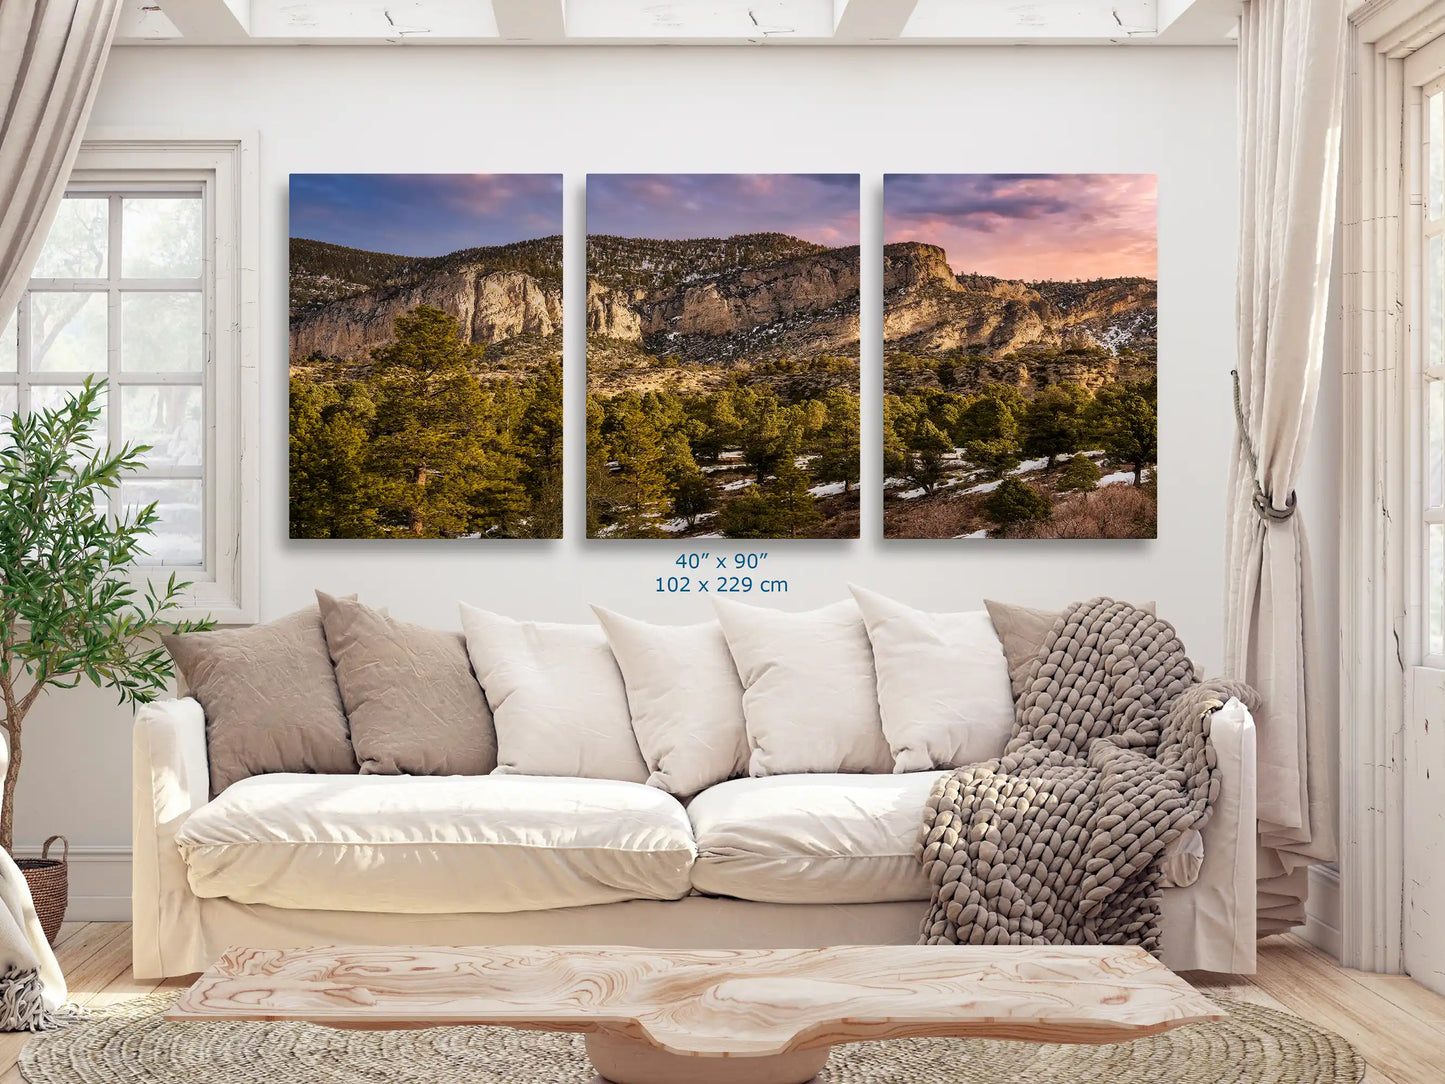 A massive 40x90 canvas of Fletcher Peak at Mt Charleston, stretched across the living room wall, inspires awe and provides a calming, immersive visual escape into nature.